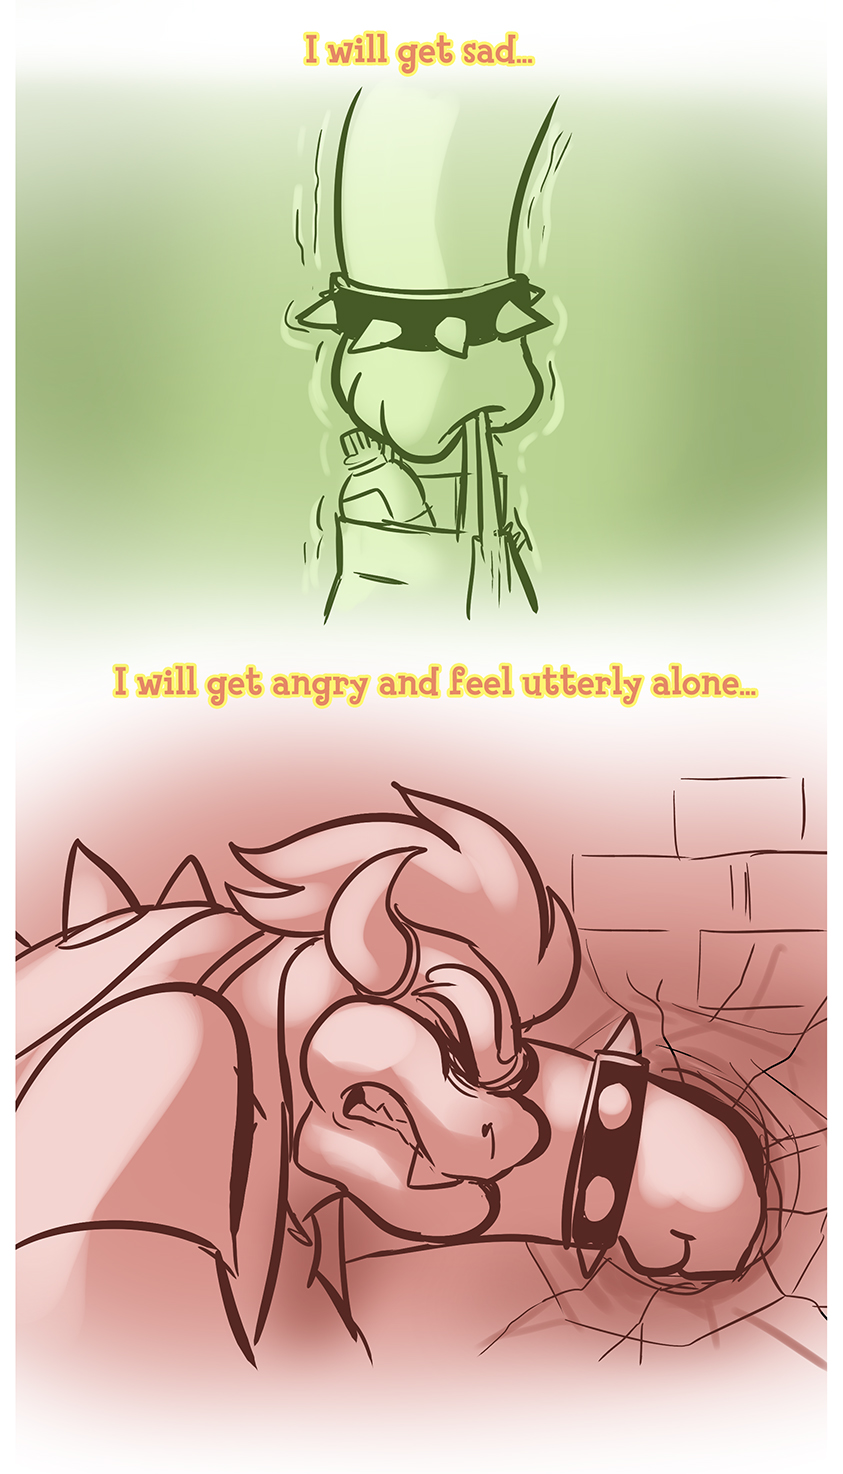 mario cart sad bowser comic - I will get sad. I will get angry and feel utterly alone